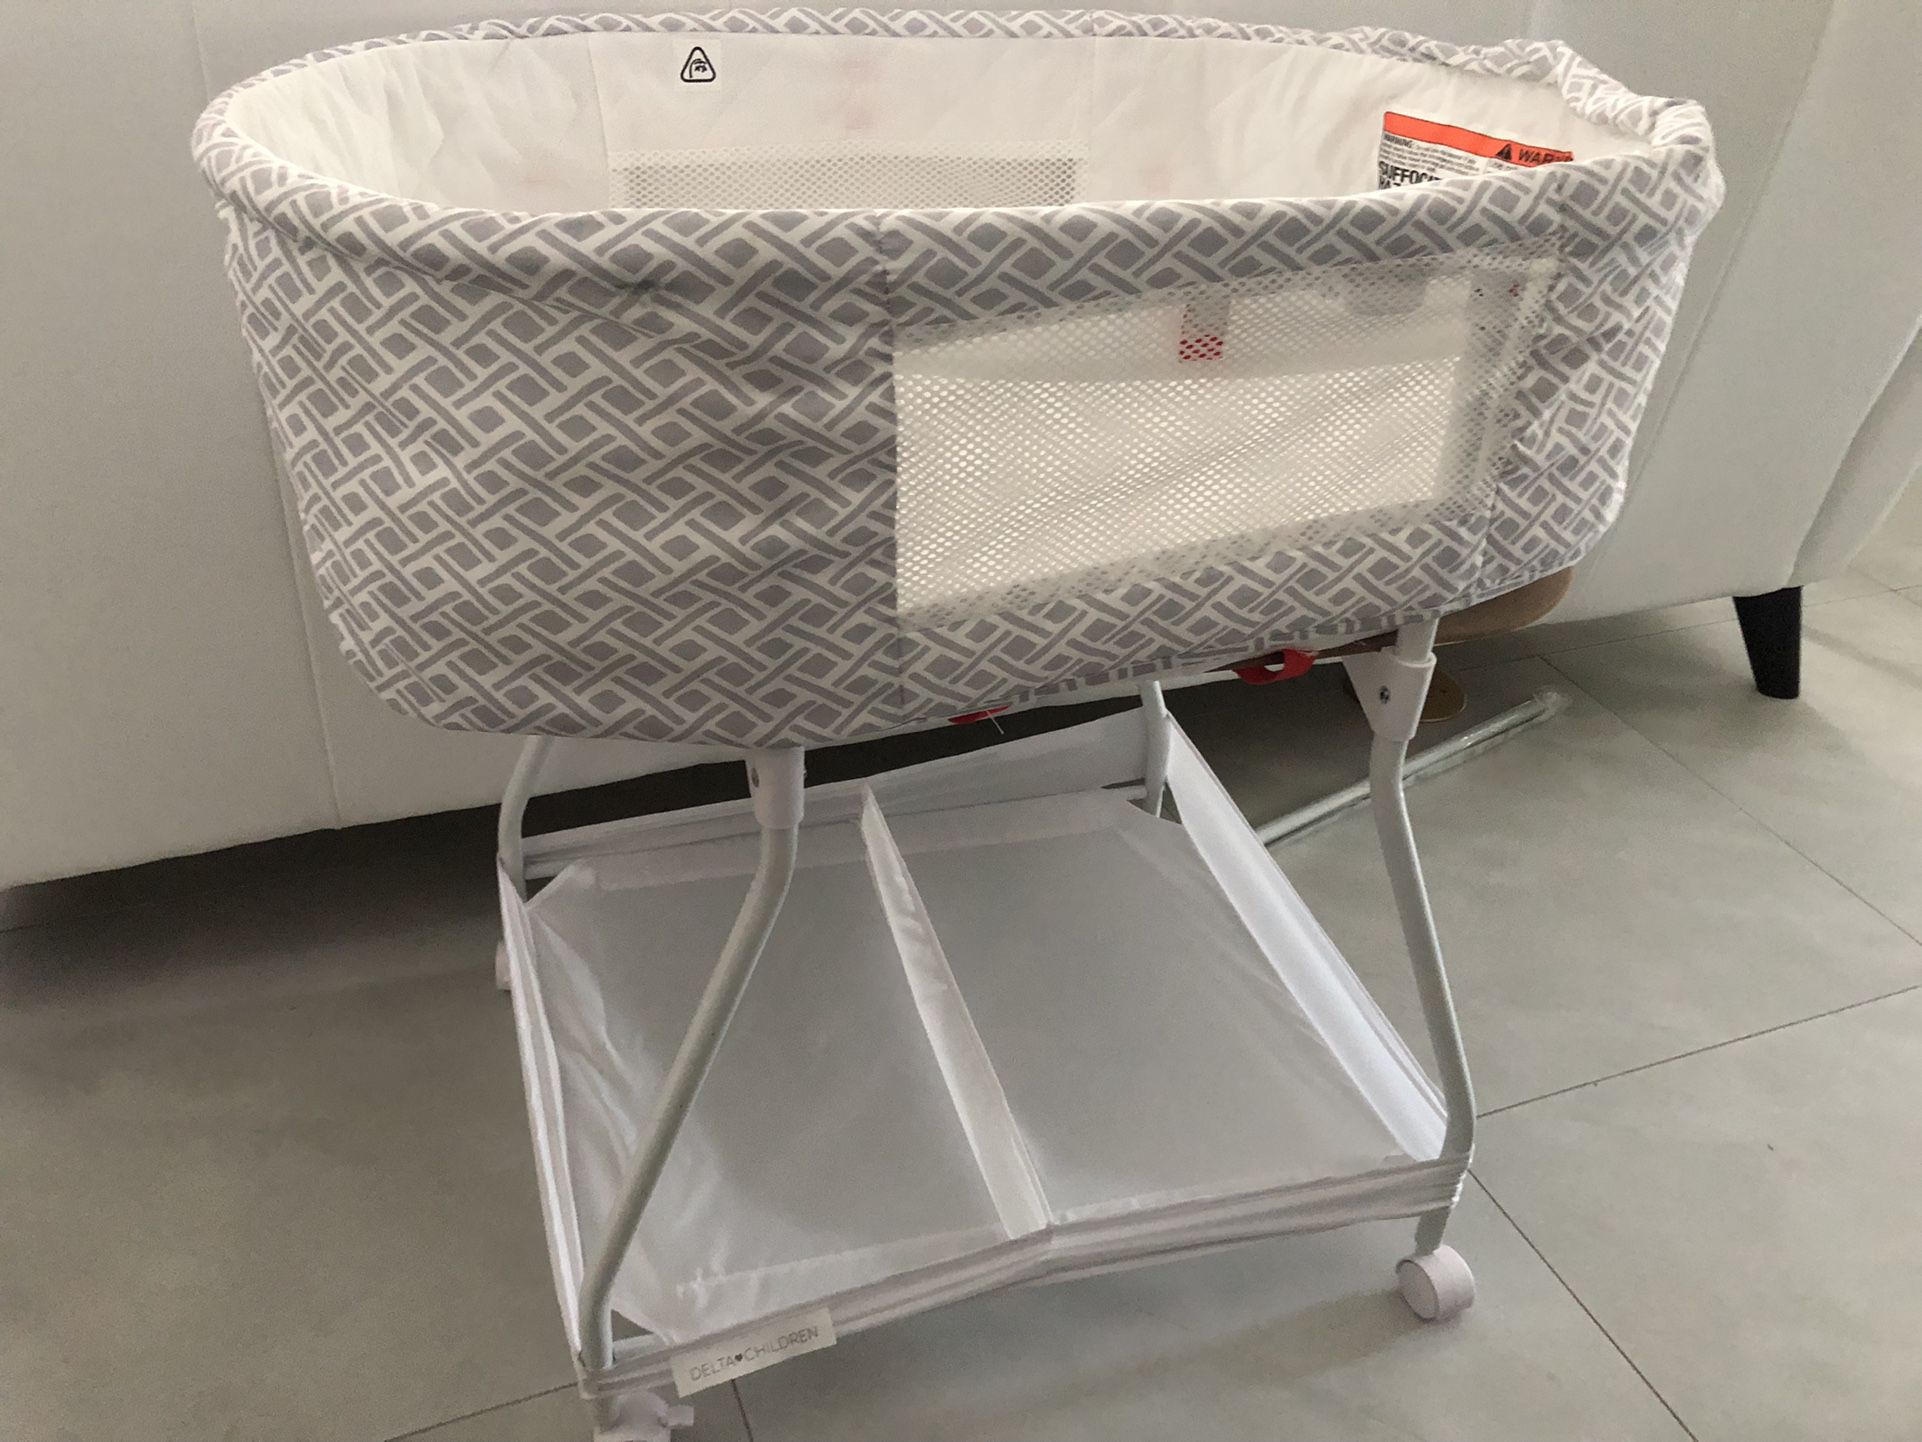 Delta children Baby bassinet. Bed. Excellent condition. Smoke-free pet free home. Pick up in Jupiter